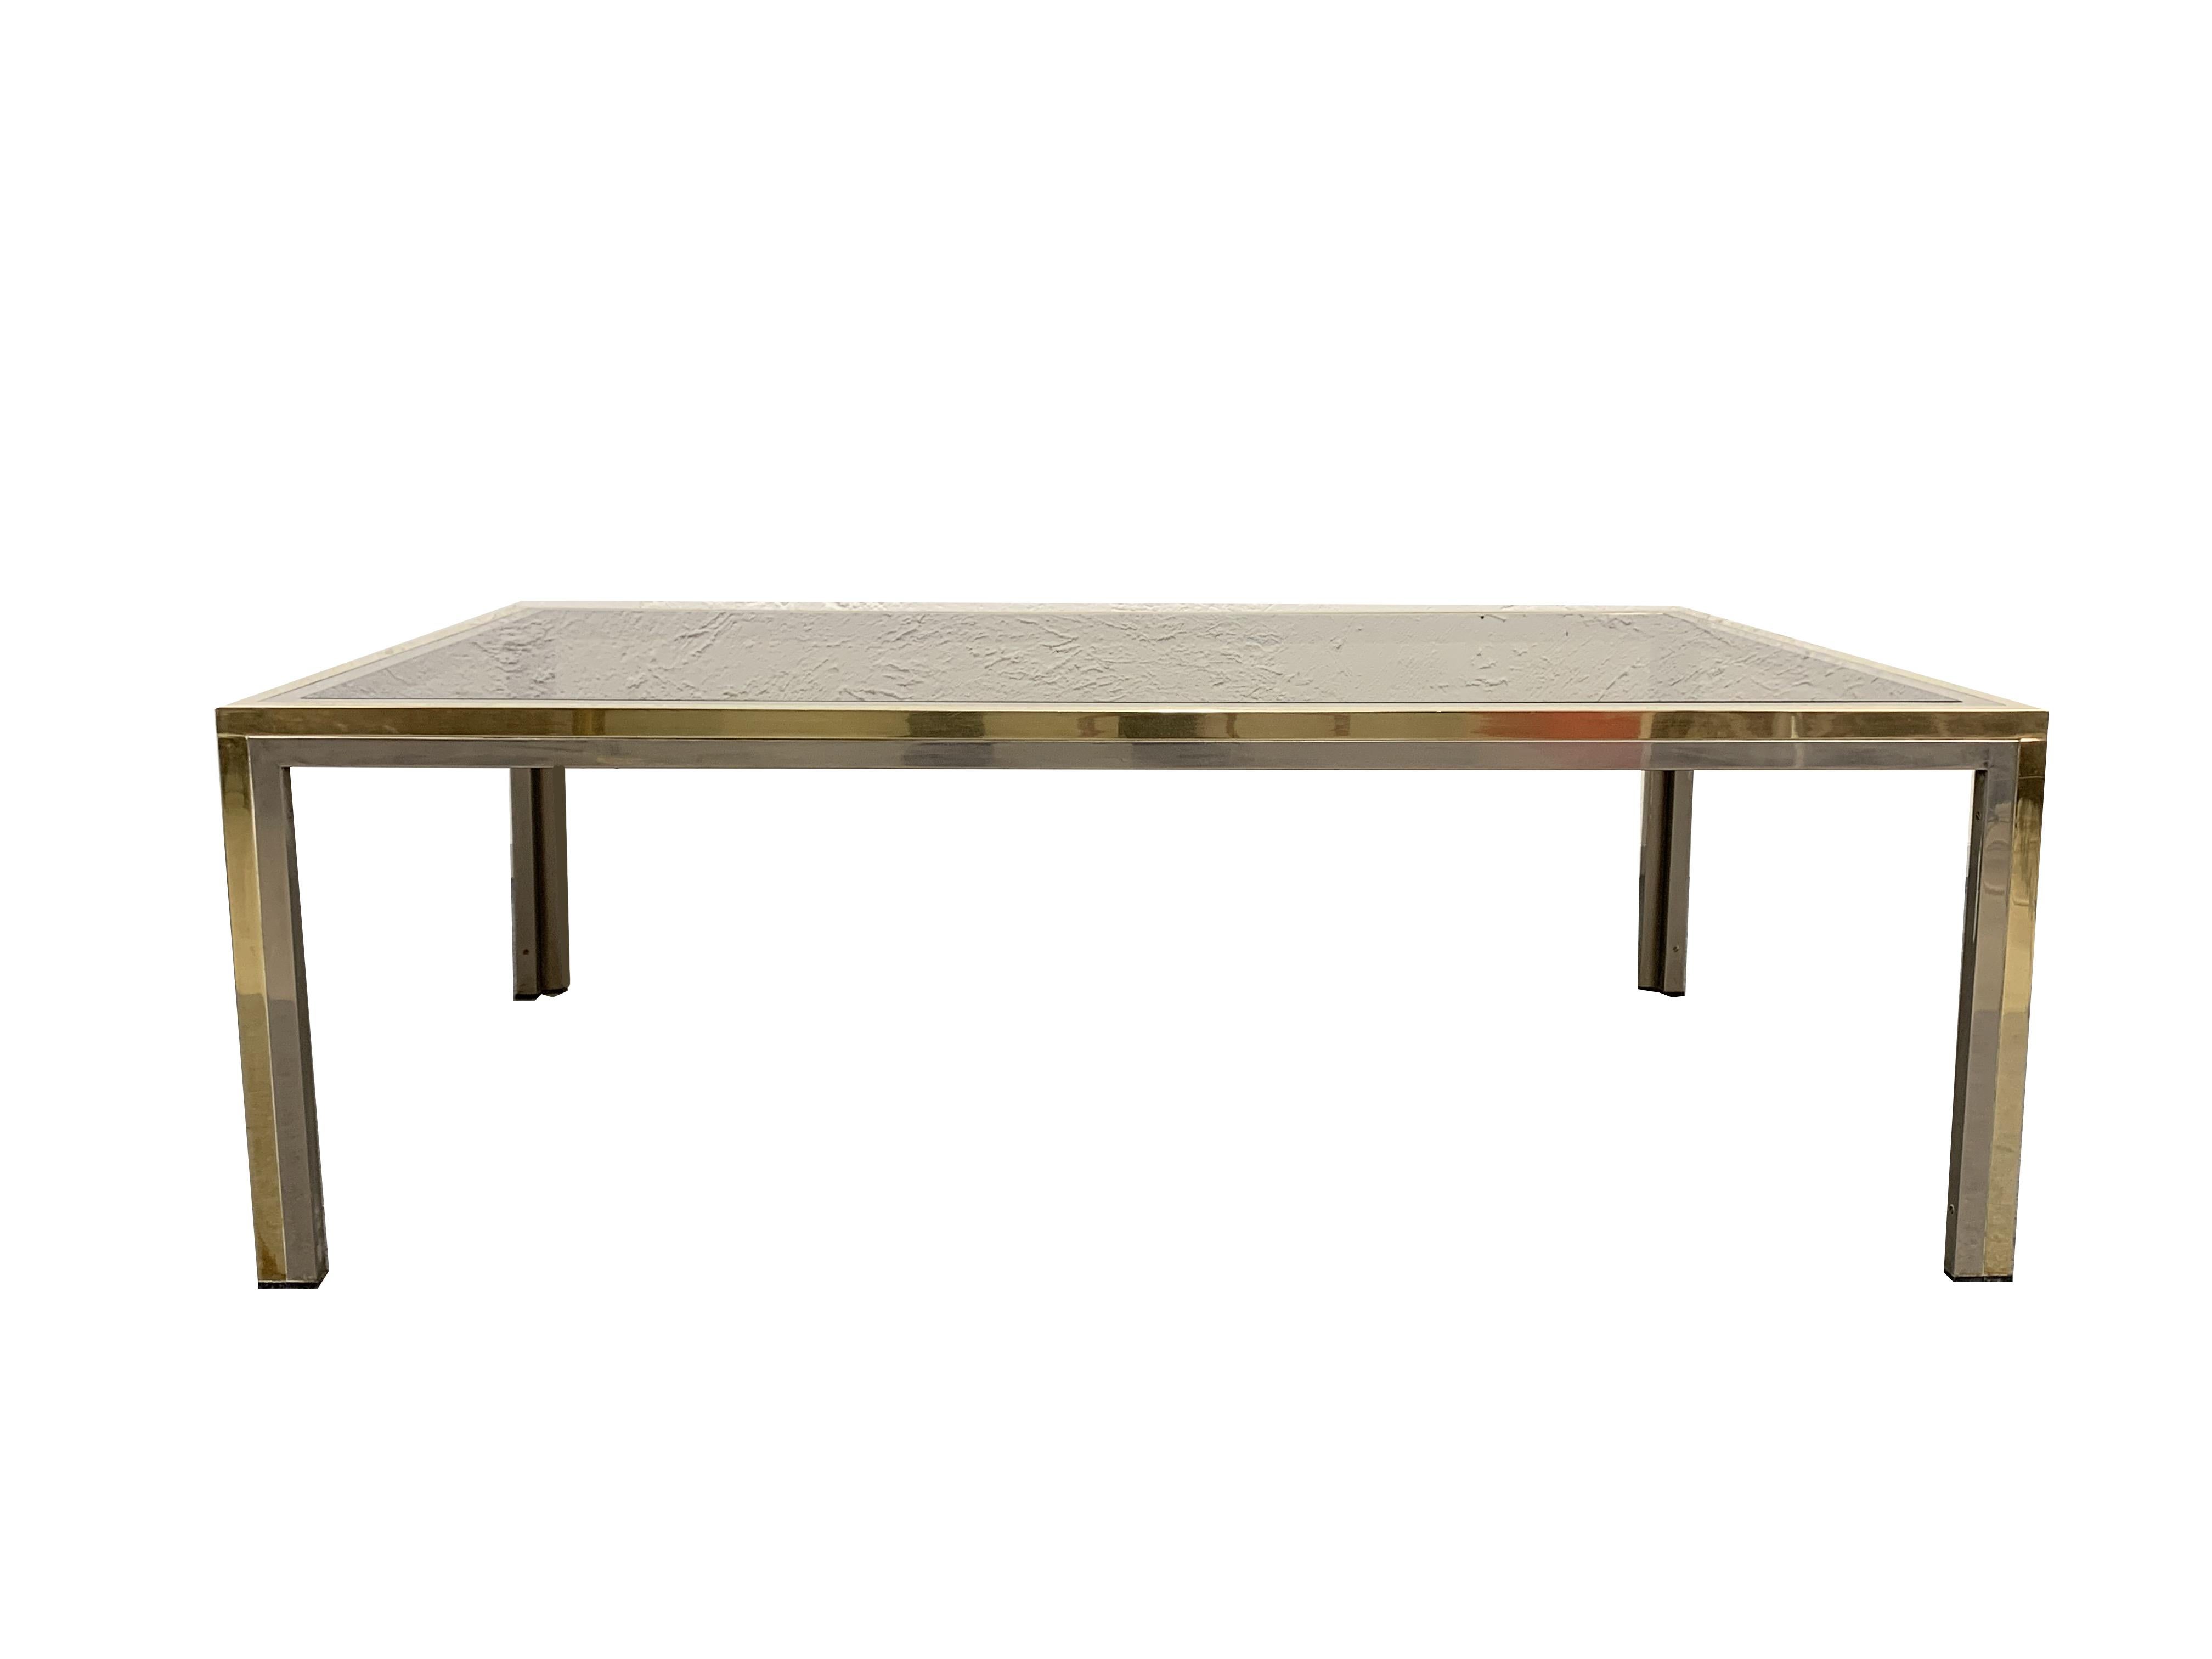 This iconic coffee table was designed in the style of Romeo Rega, one of the best Italian designers during the 1970s, associated with a combination of modernism and glamour in their furniture creations.

Like most of Rega's production, this